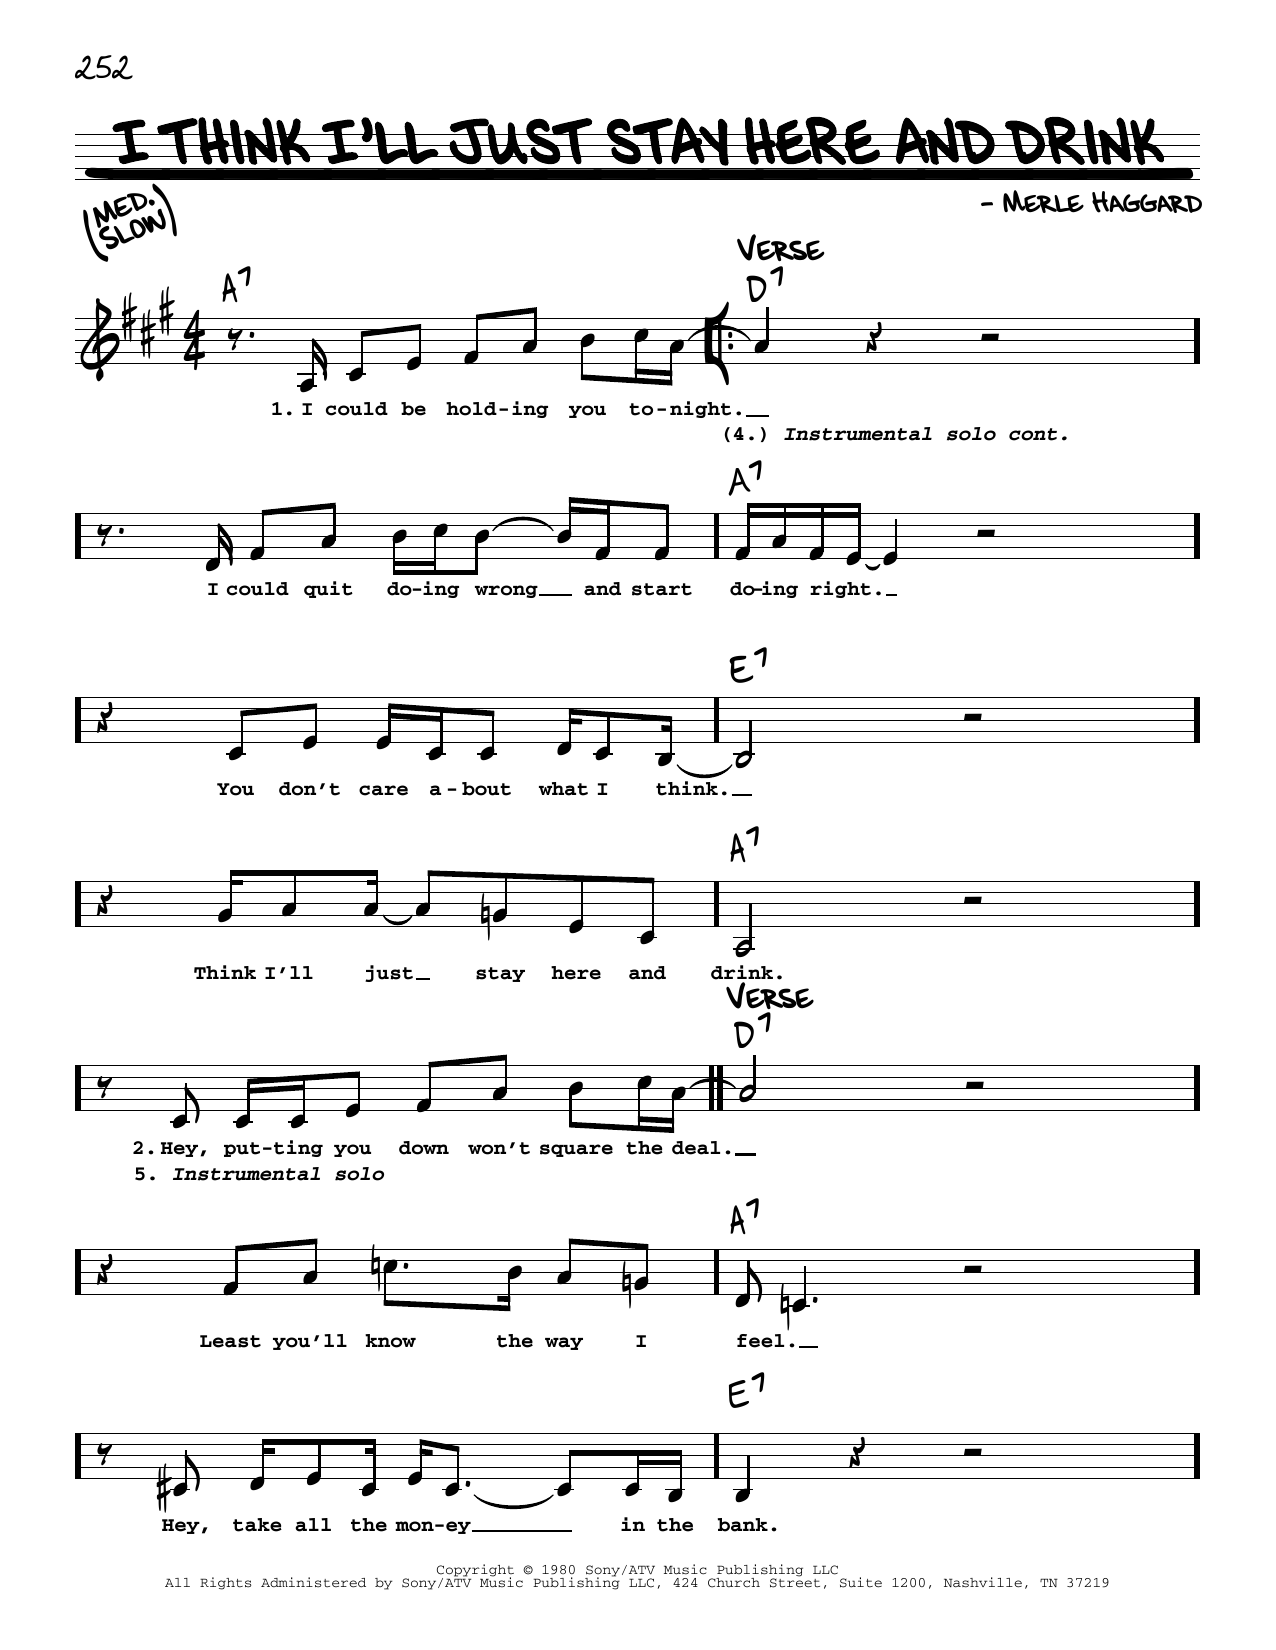 Download Merle Haggard I Think I'll Just Stay Here And Drink Sheet Music